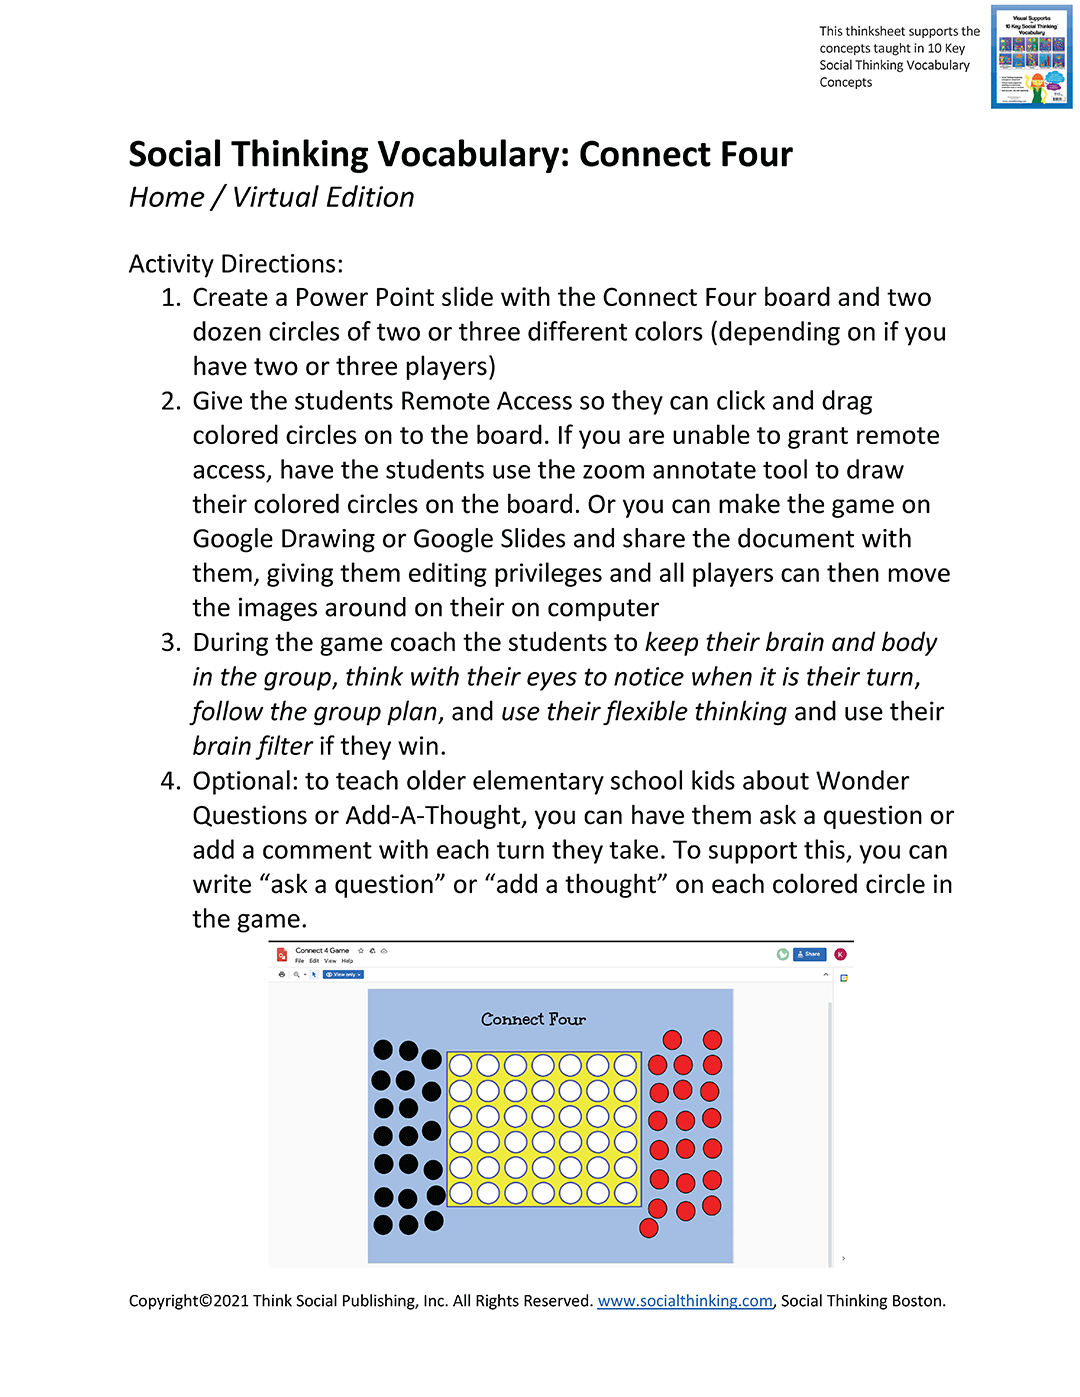 Social Thinking Vocabulary: Connect Four